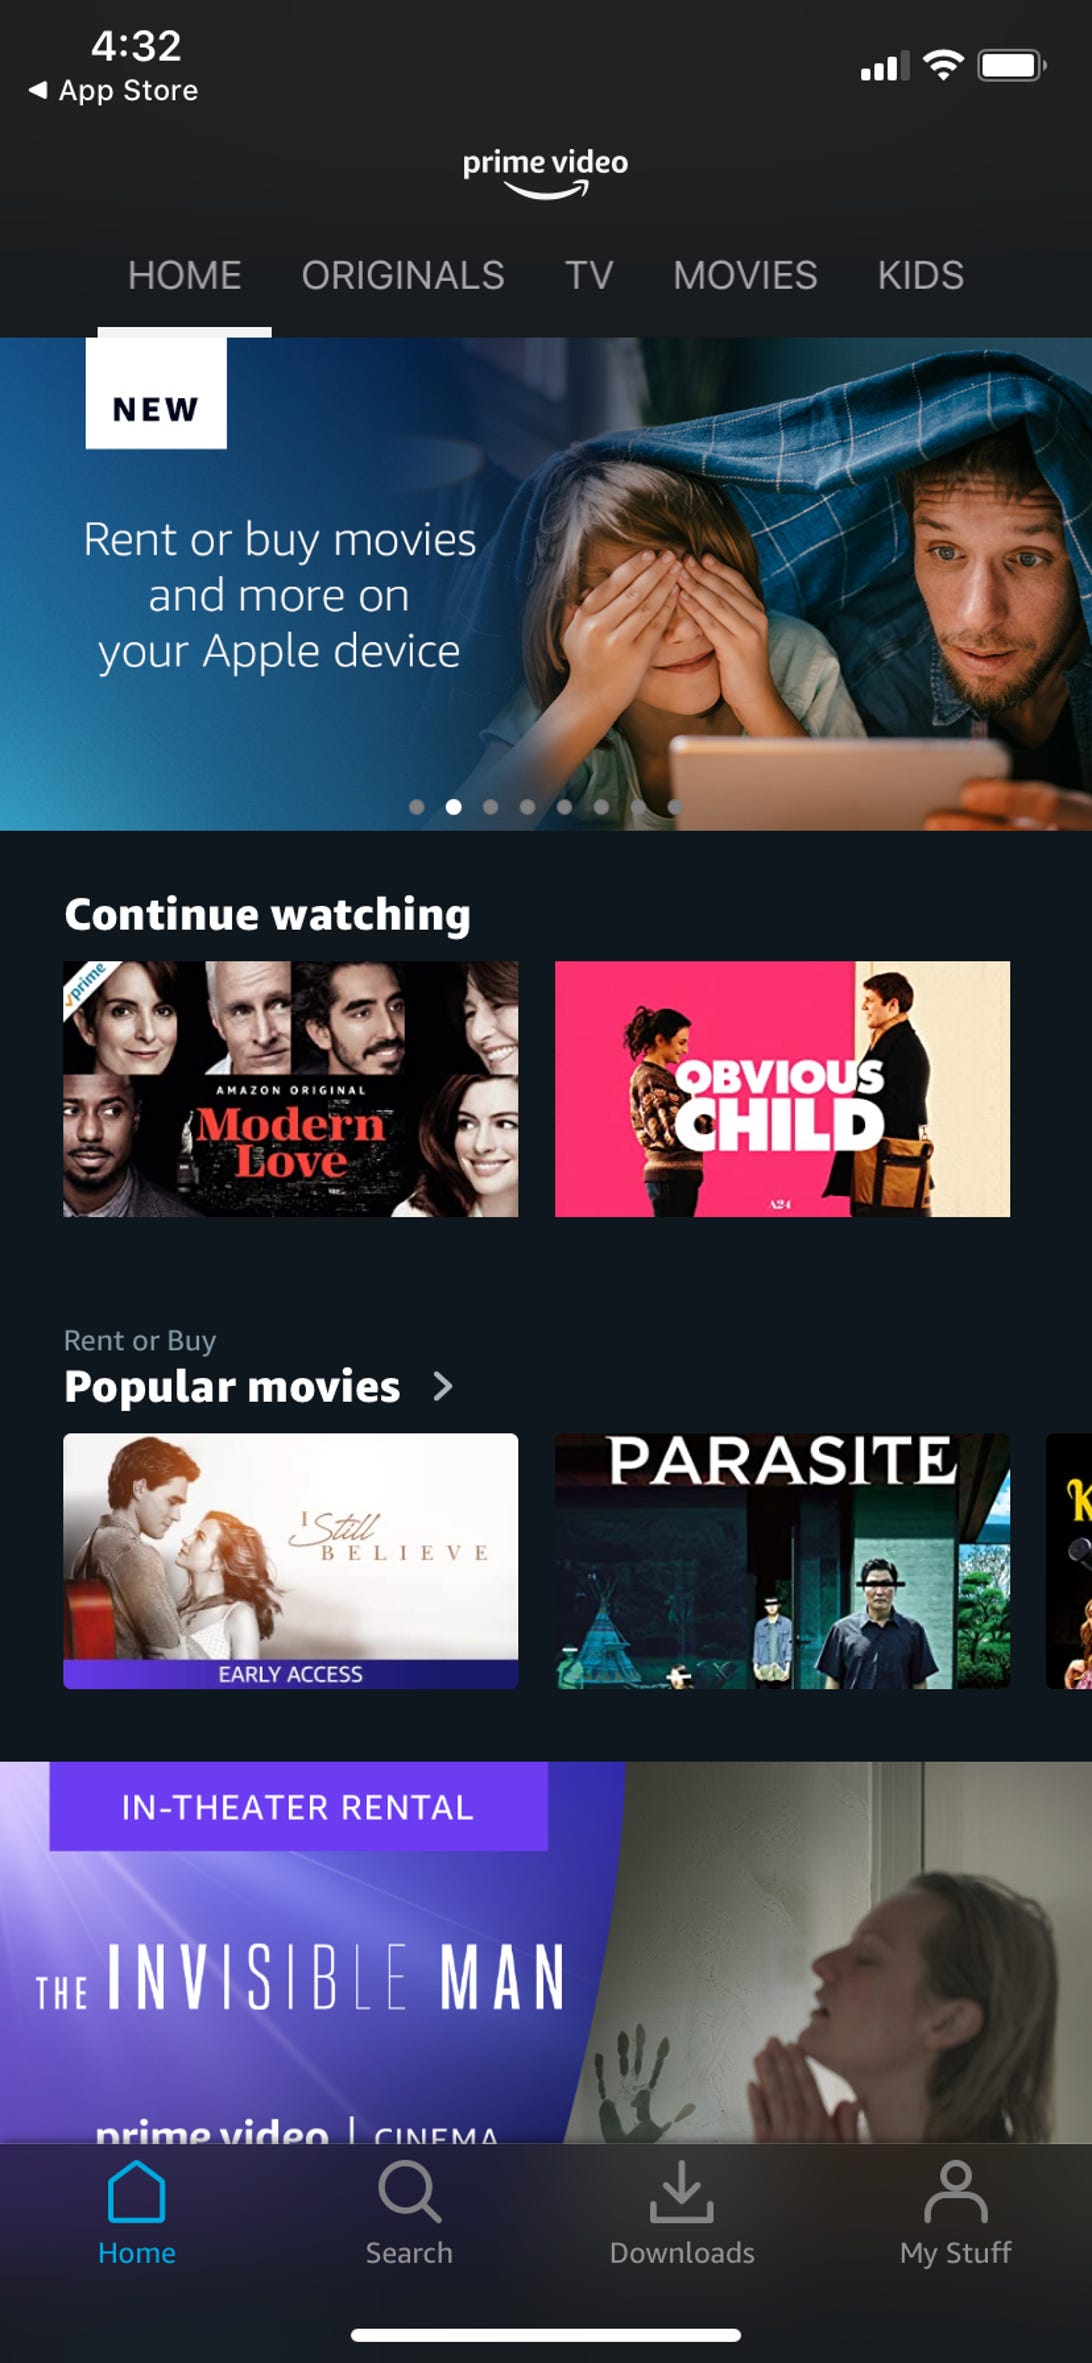 Amazon Prime Video now allows in-app purchases on iOS